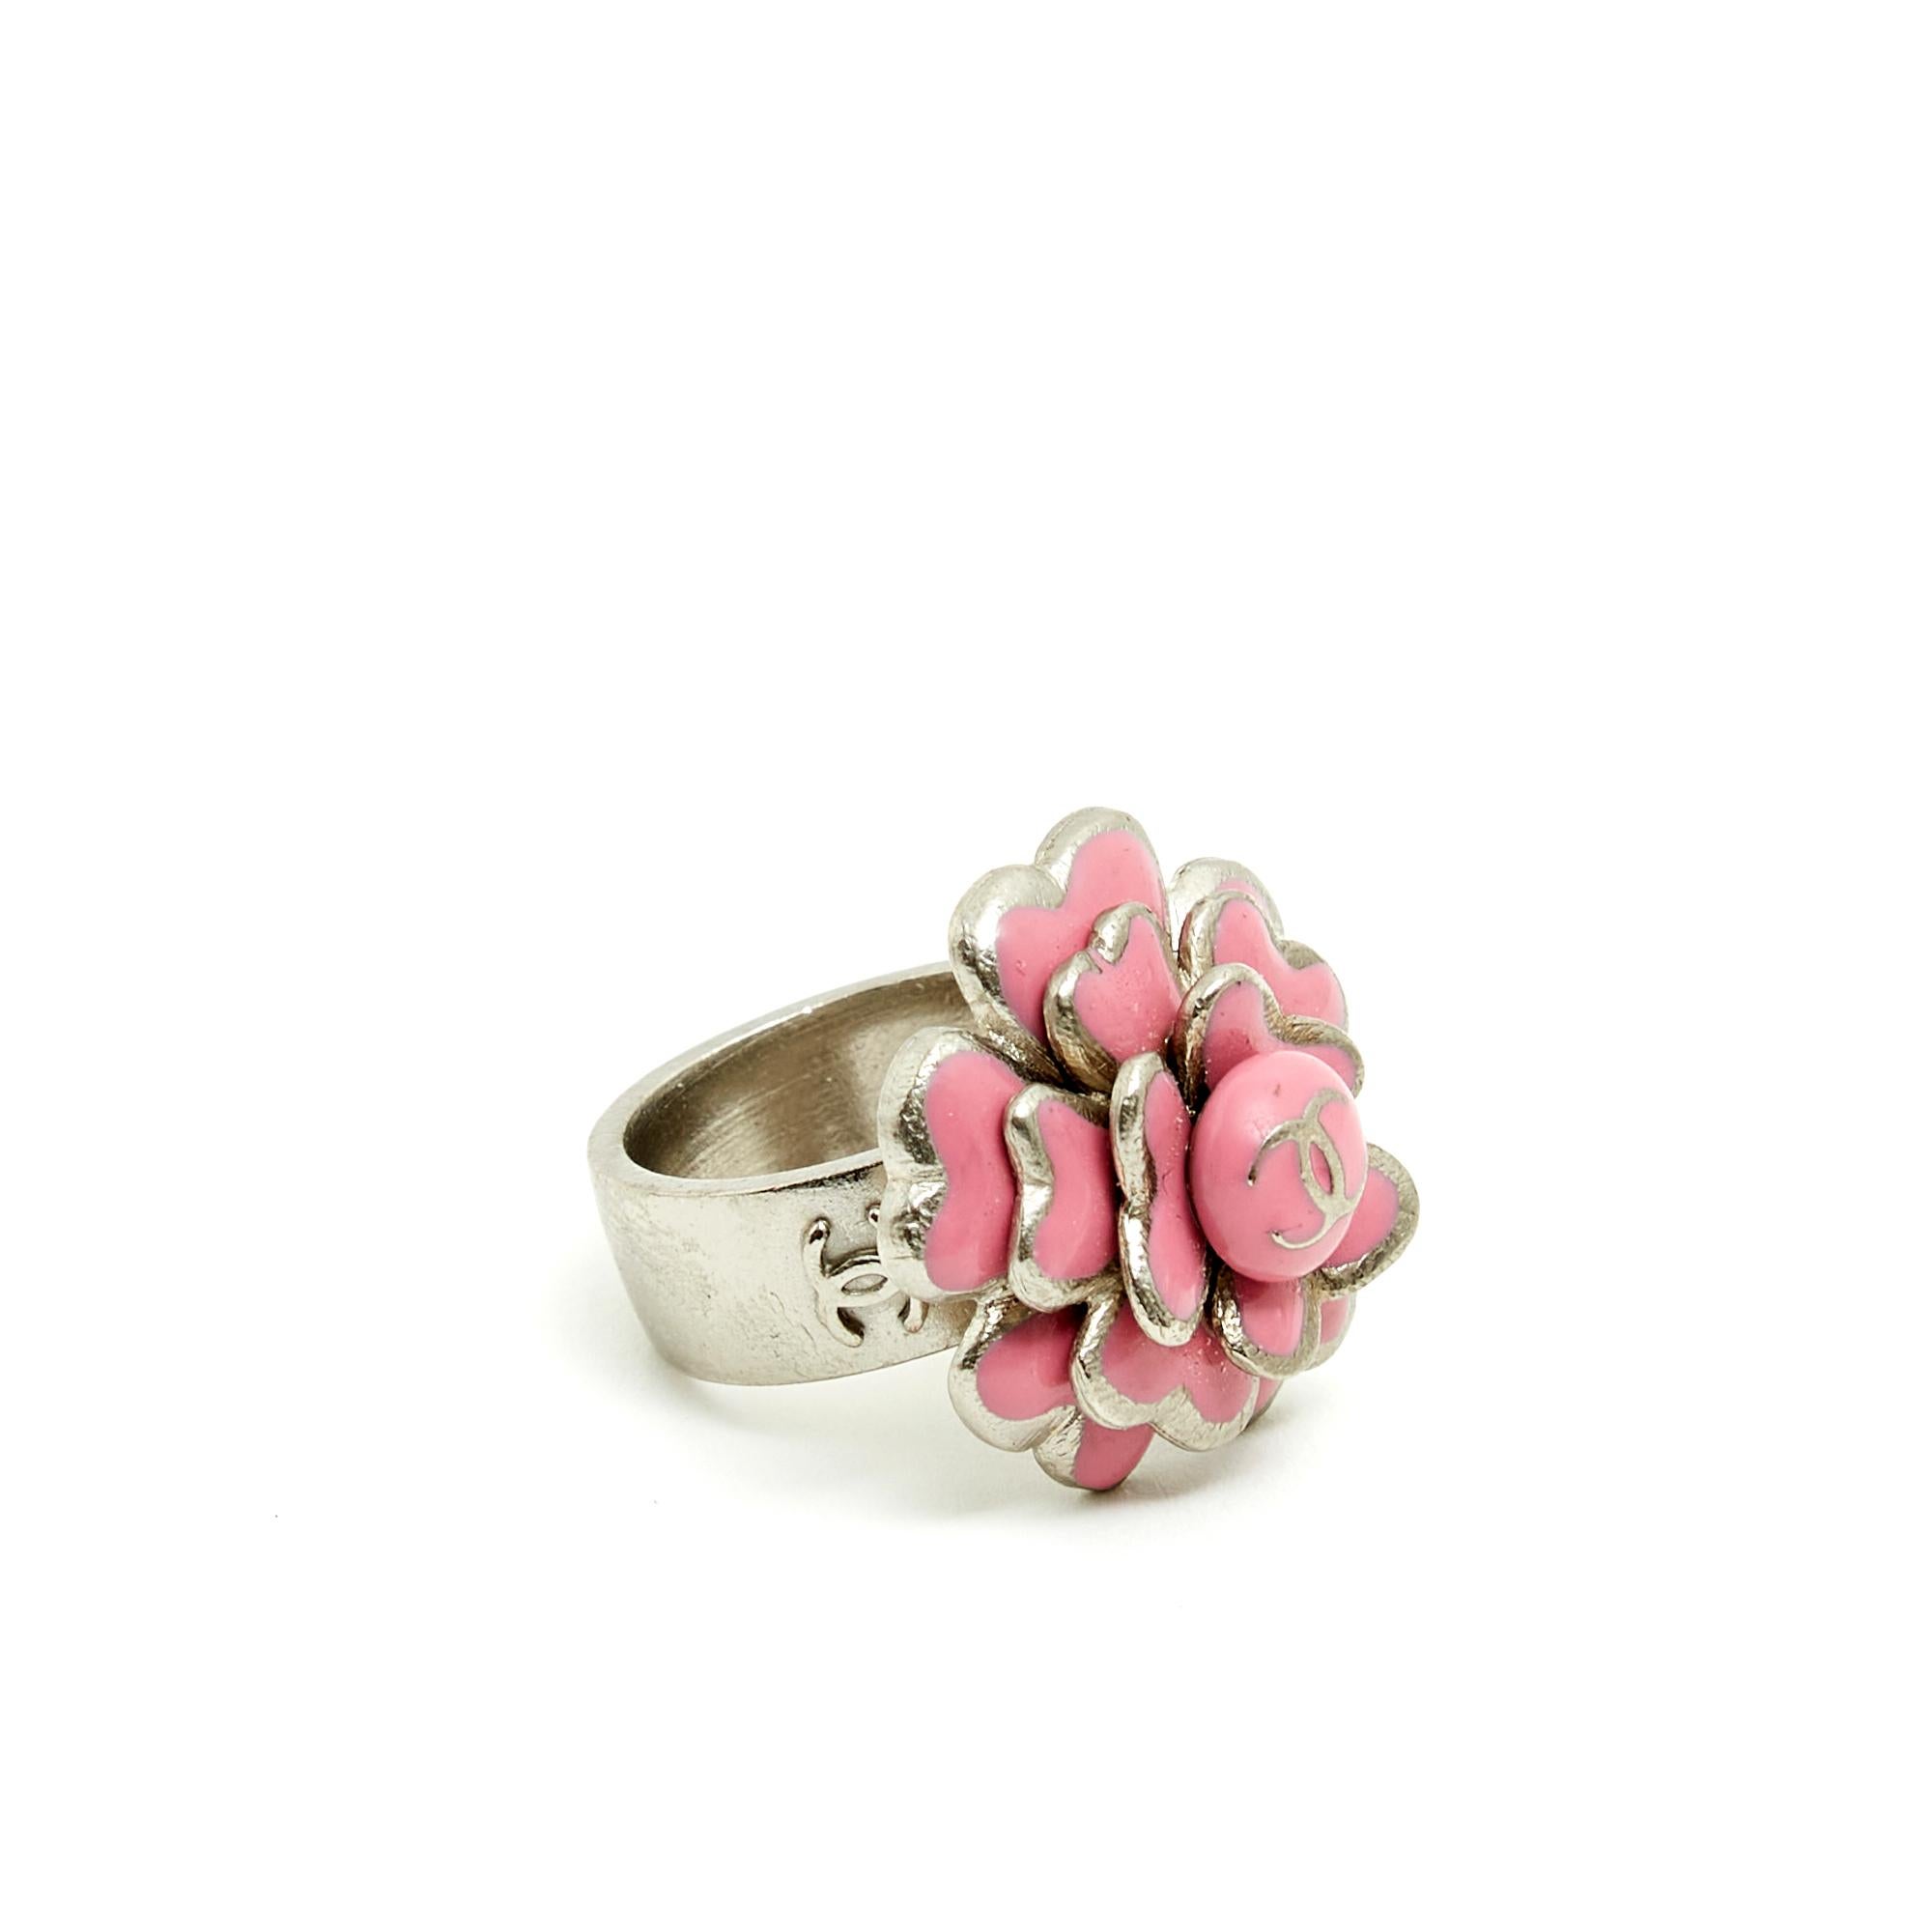 Chanel ring from the Cruise 2005 collection composed of a large ring and a camelia in silver metal and pink enamel surmounted by a CC. Finger circumference 53/54 approximately, inside diameter of the ring 1.72 cm, width of the ring 0.8 cm, diameter